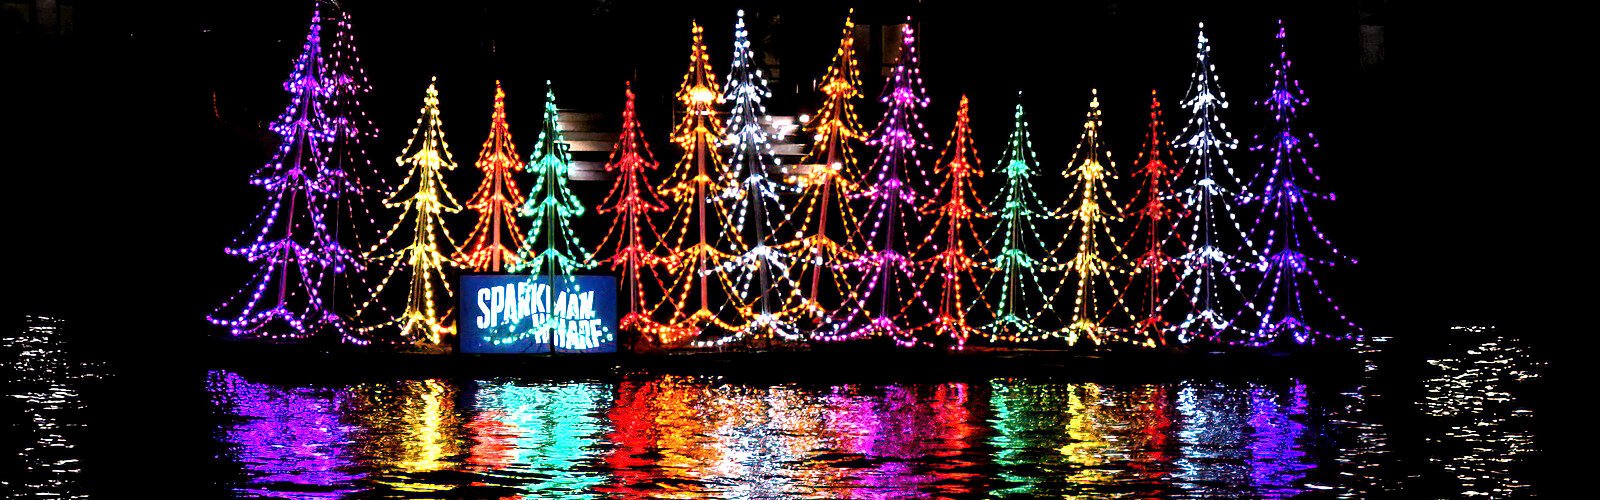 A colorful floating holiday display casts dazzling reflections into the Hillsborough River right across from the Winter Village at Curtis Hixon Waterfront Park in downtown Tampa.